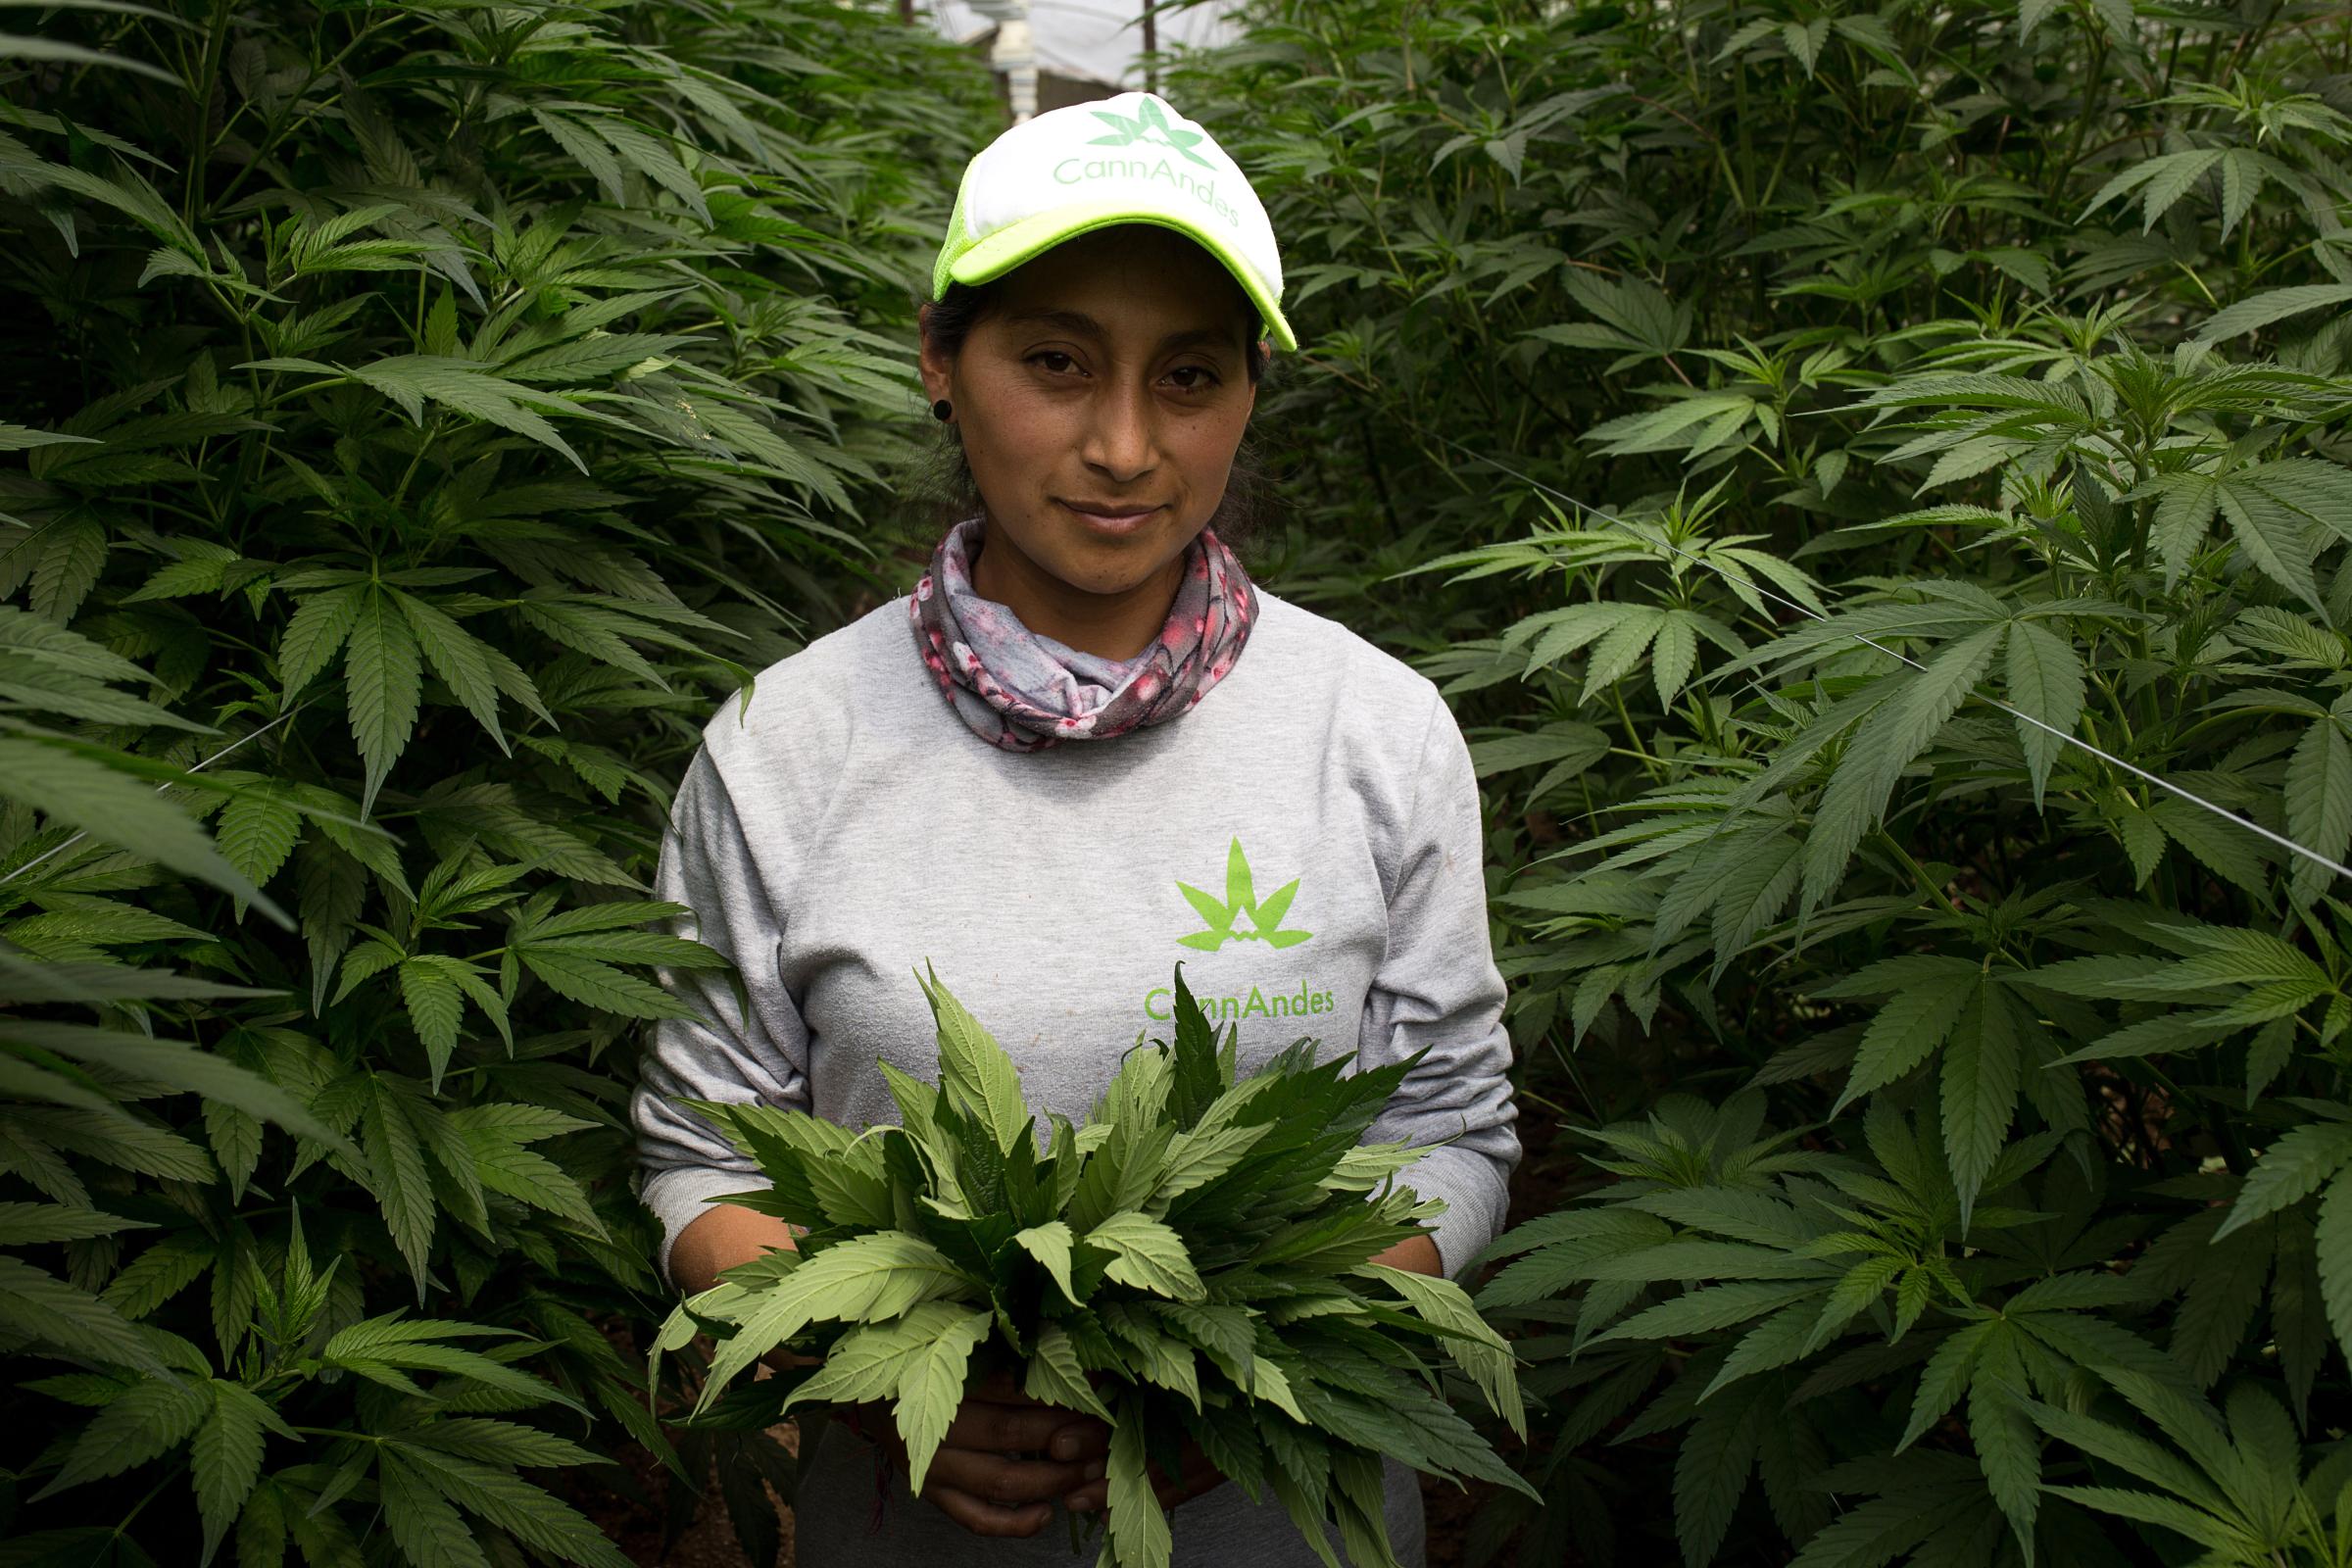 A worker inspects cannabis plants in a greenhouse at CannAndes farms in Tabacundo, Ecuador, on...